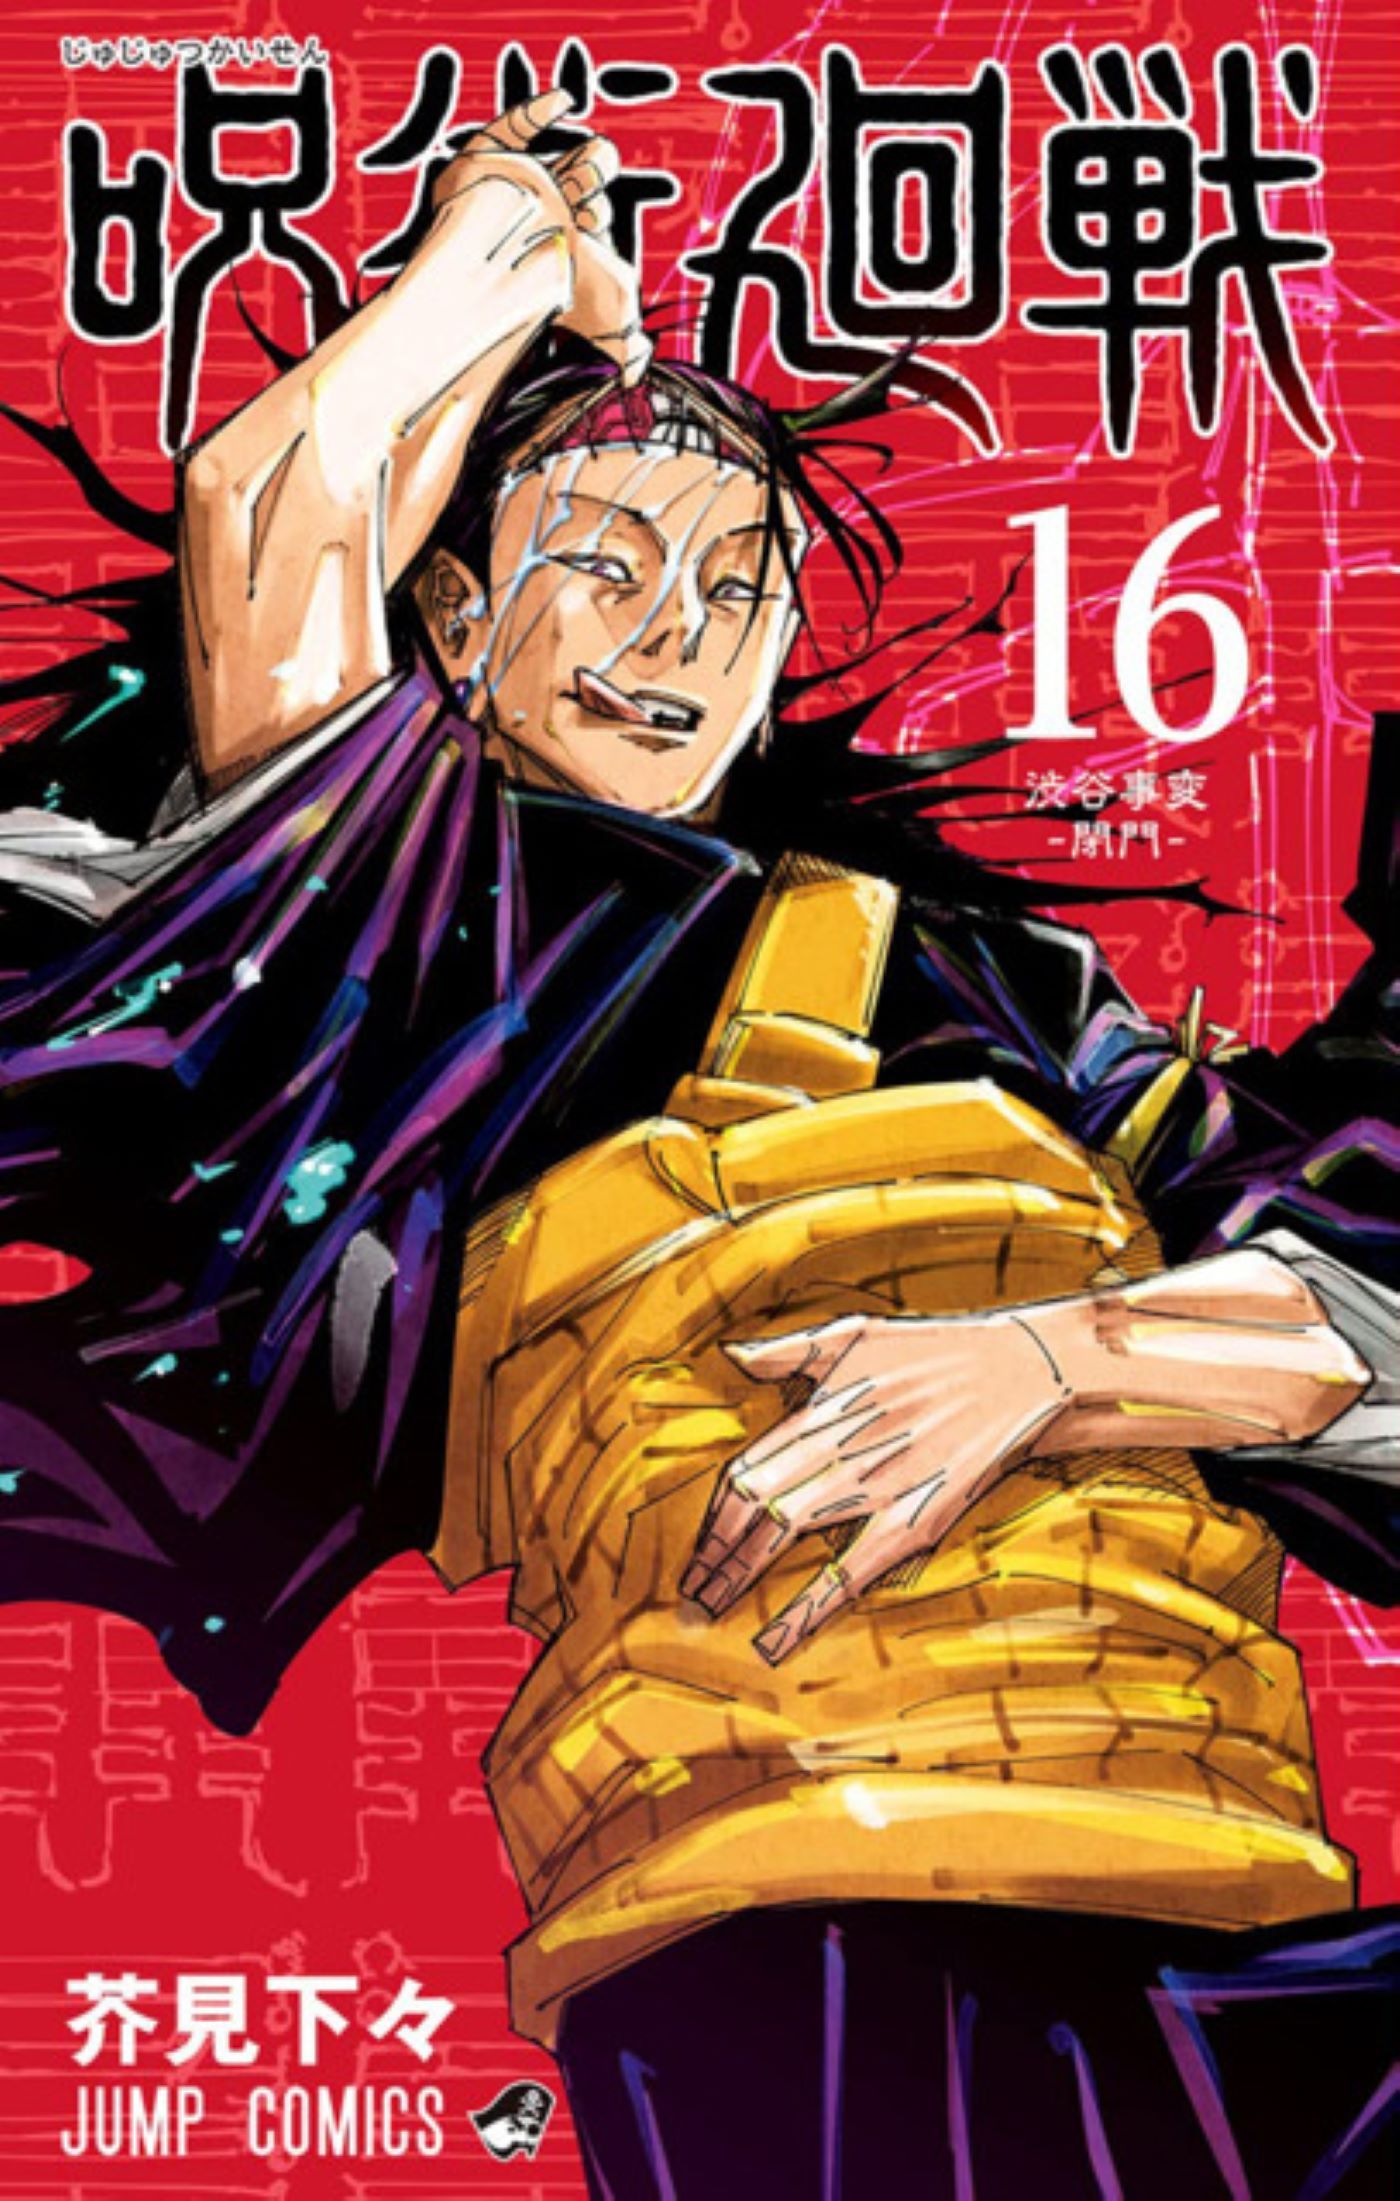 Jujutsu Cover #16 - Kenjaku sticking out tongue while lifting up scalp from stitches